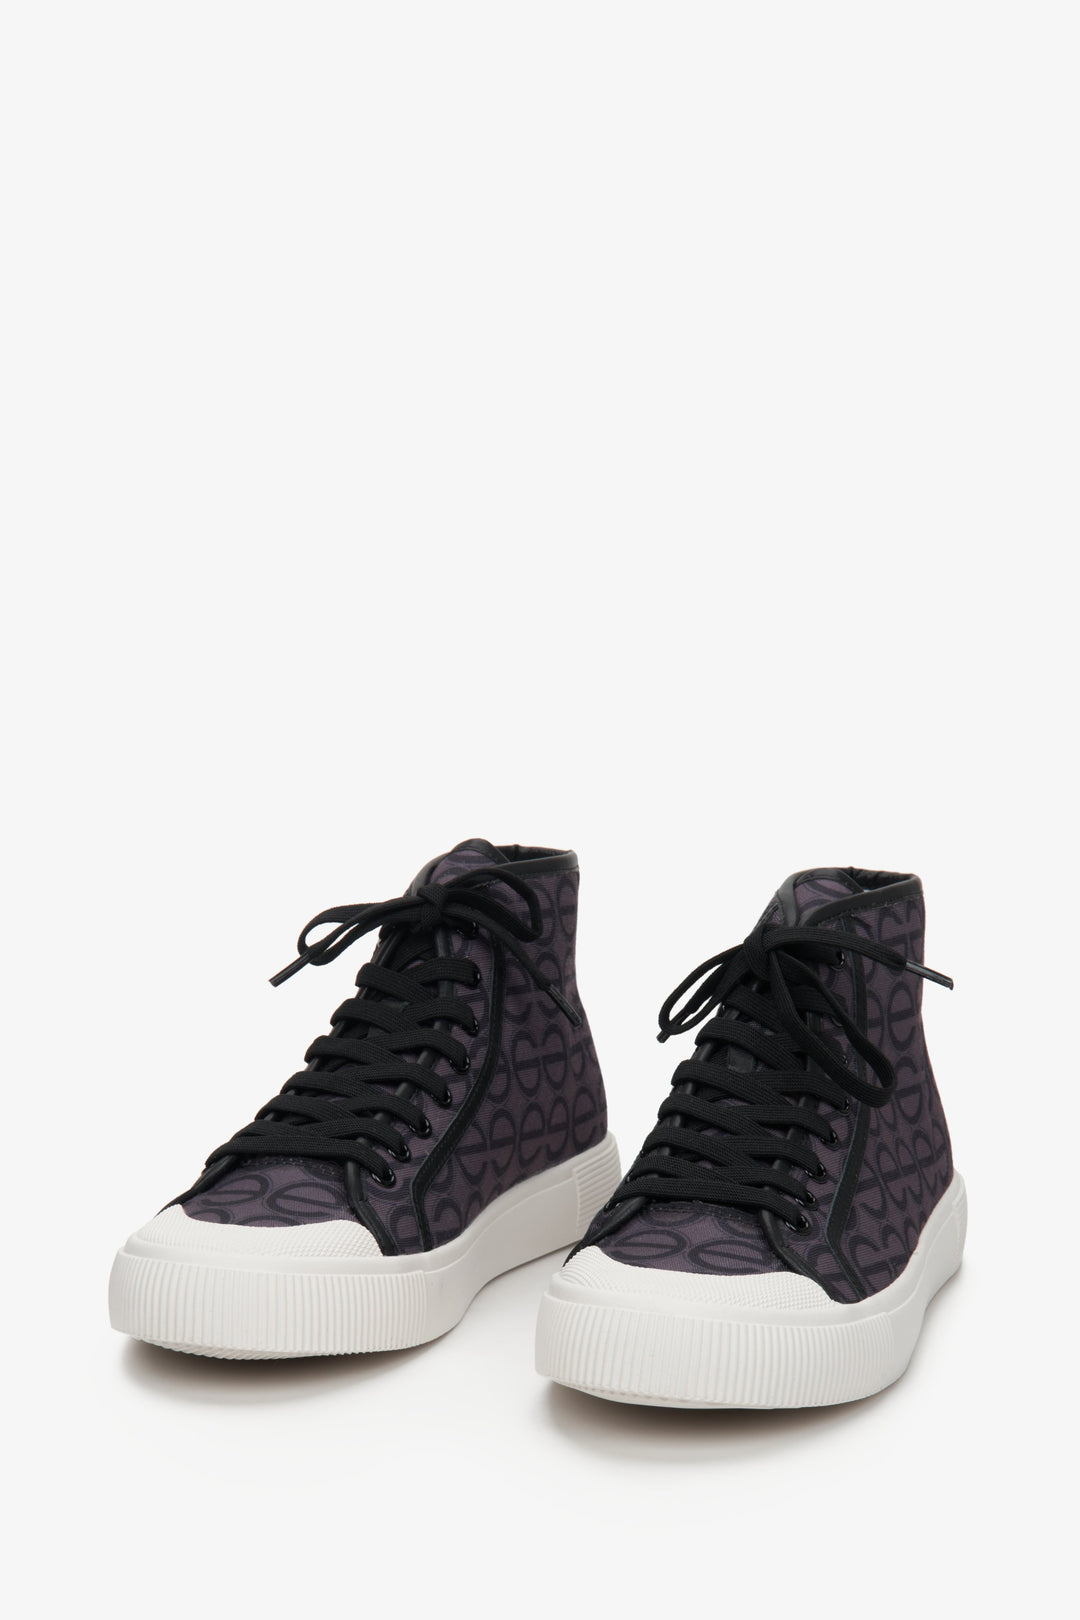 Black and purple women's high top sneakers, laced, by Estro.